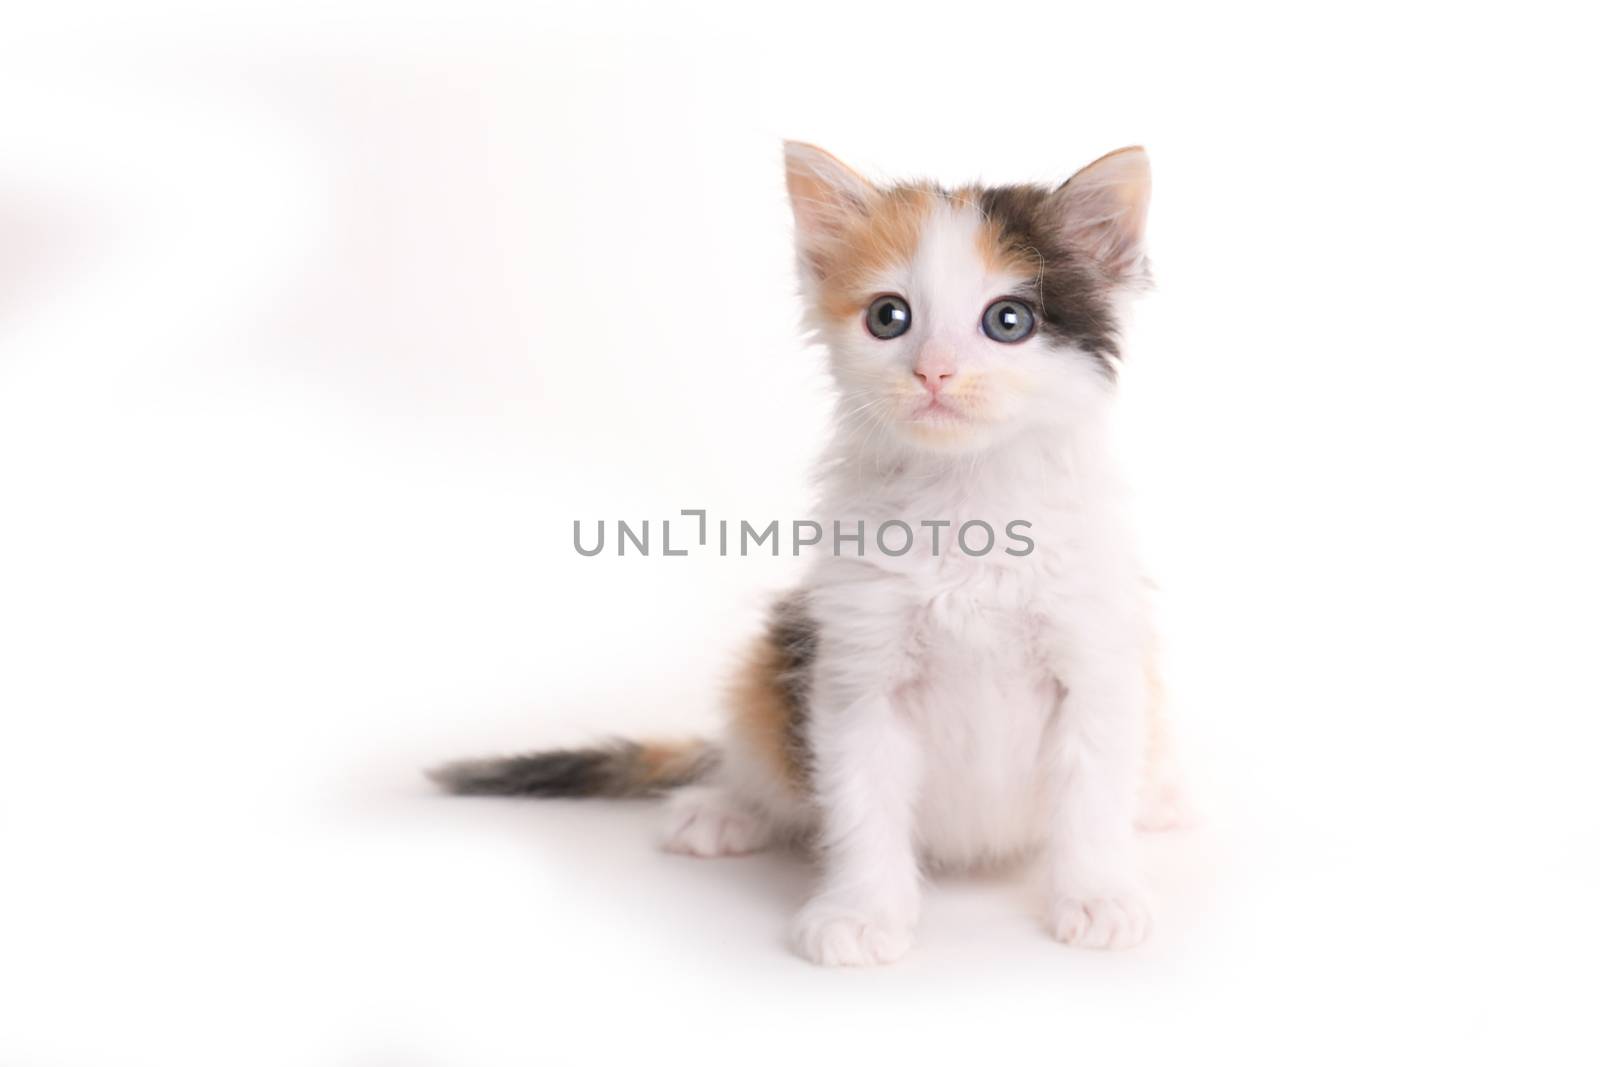 Calico Kitten Looking Up With Curiosity on White Backgroud